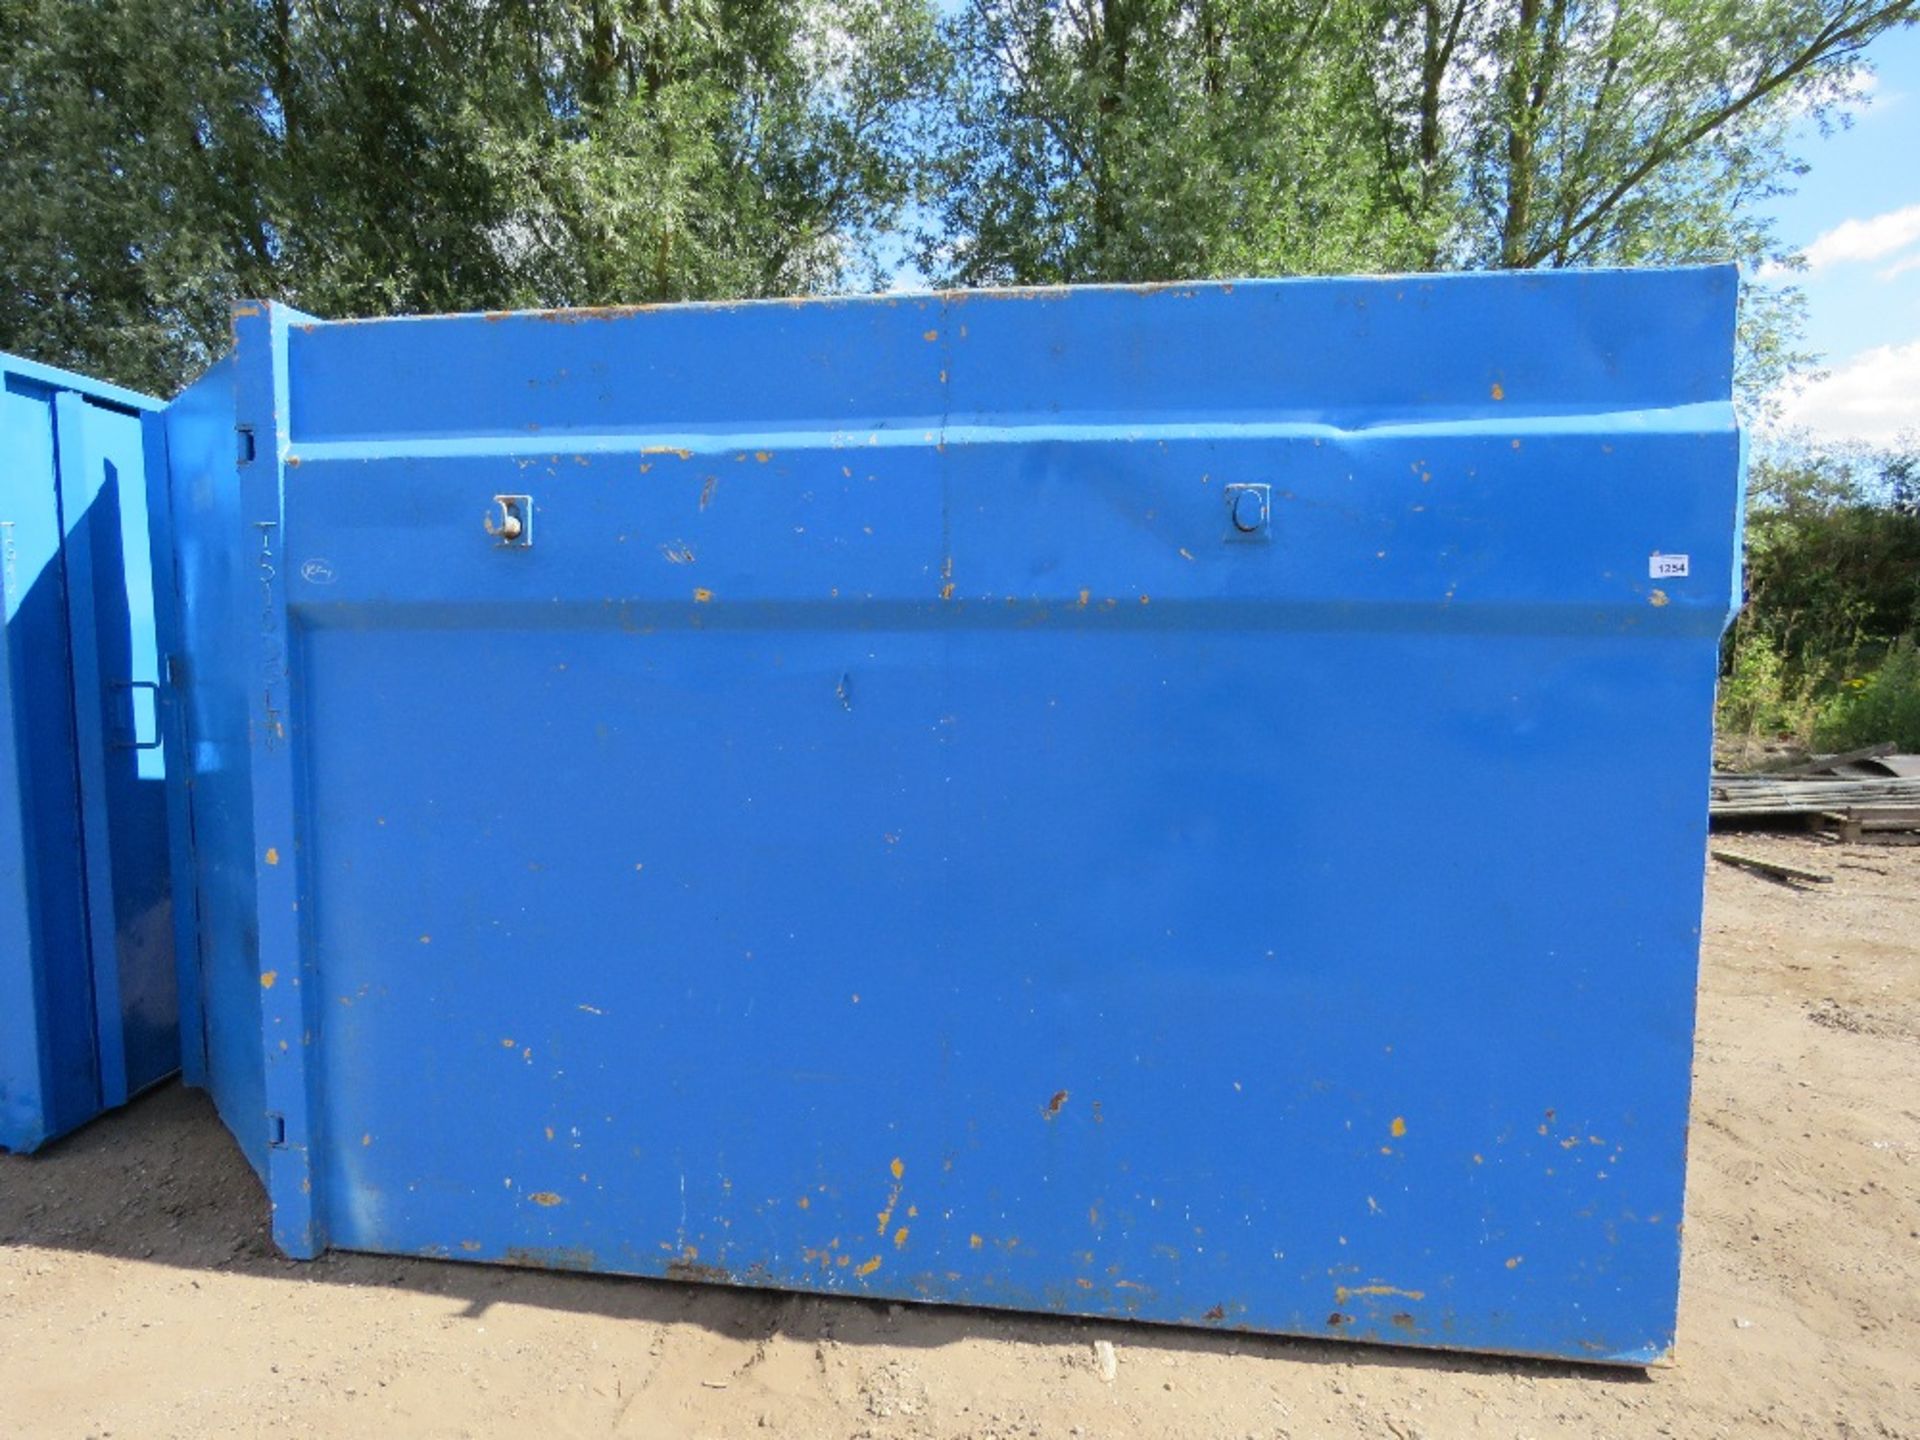 SKIP CHAIN LIFT ENCLOSED STEEL STORAGE CONTAINER 3M X 1.75M APPROX TS10 WITH KEYS. DIRECT FROM